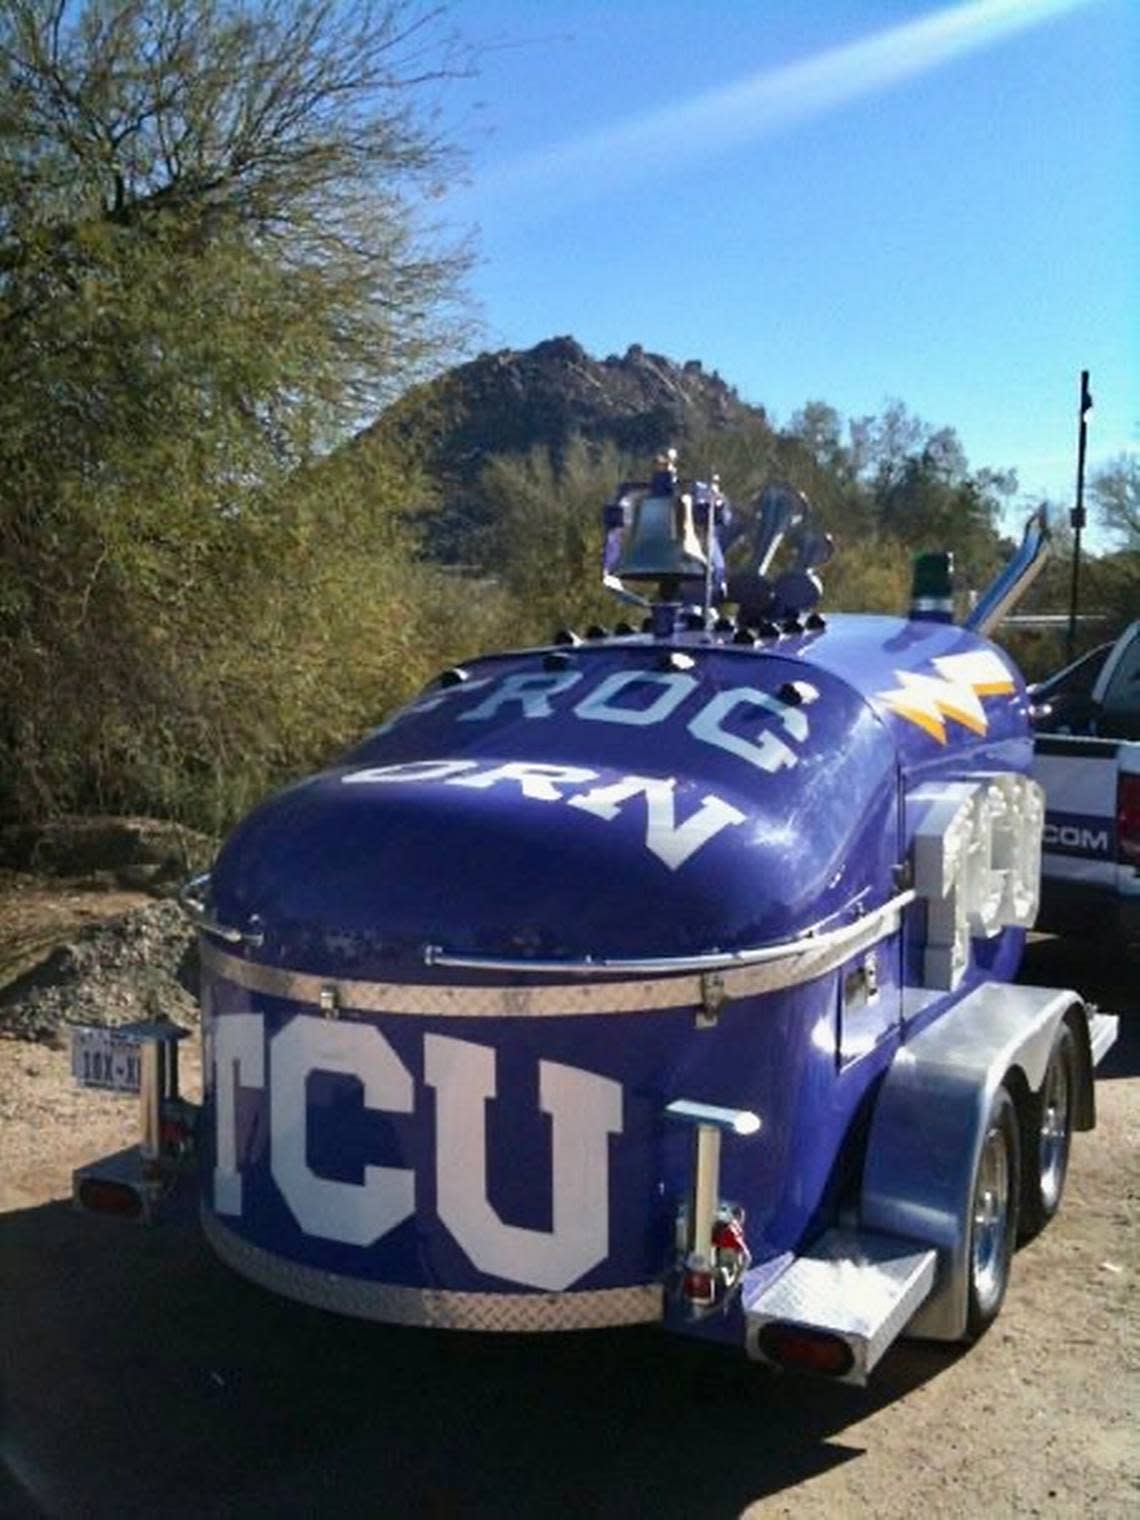 The Frog Horn visited the mountains outside Phoenix, Arizona, before the 2010 Fiesta Bowl. TCU lost, 17-10, to Boise State.